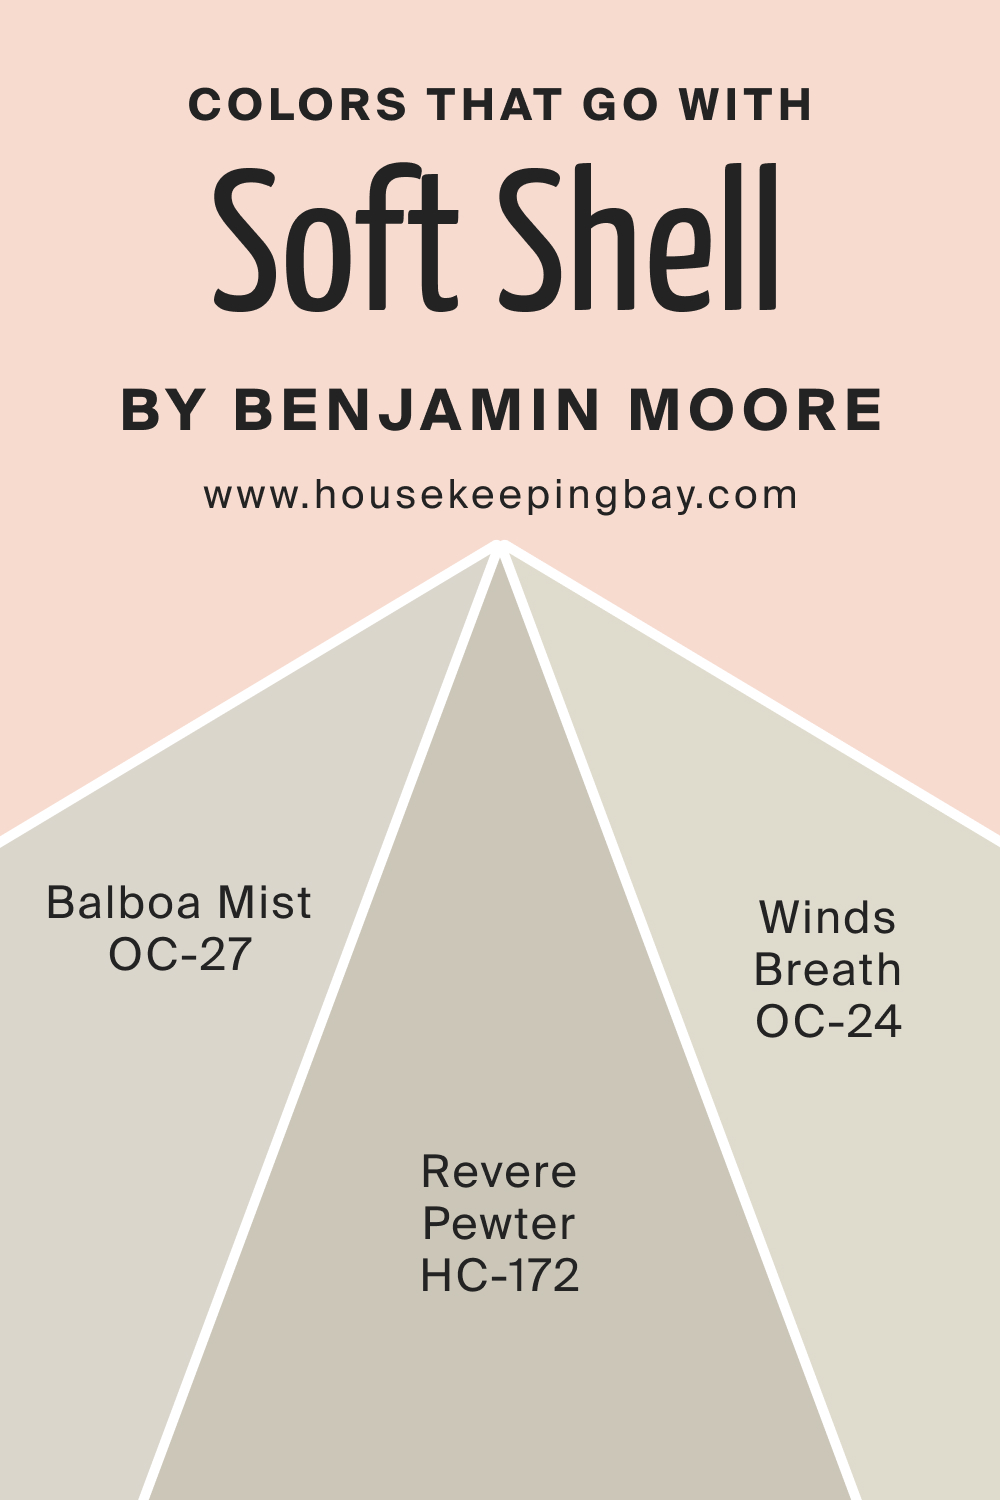 Colors that goes with Soft Shell 015 by Benjamin Moore